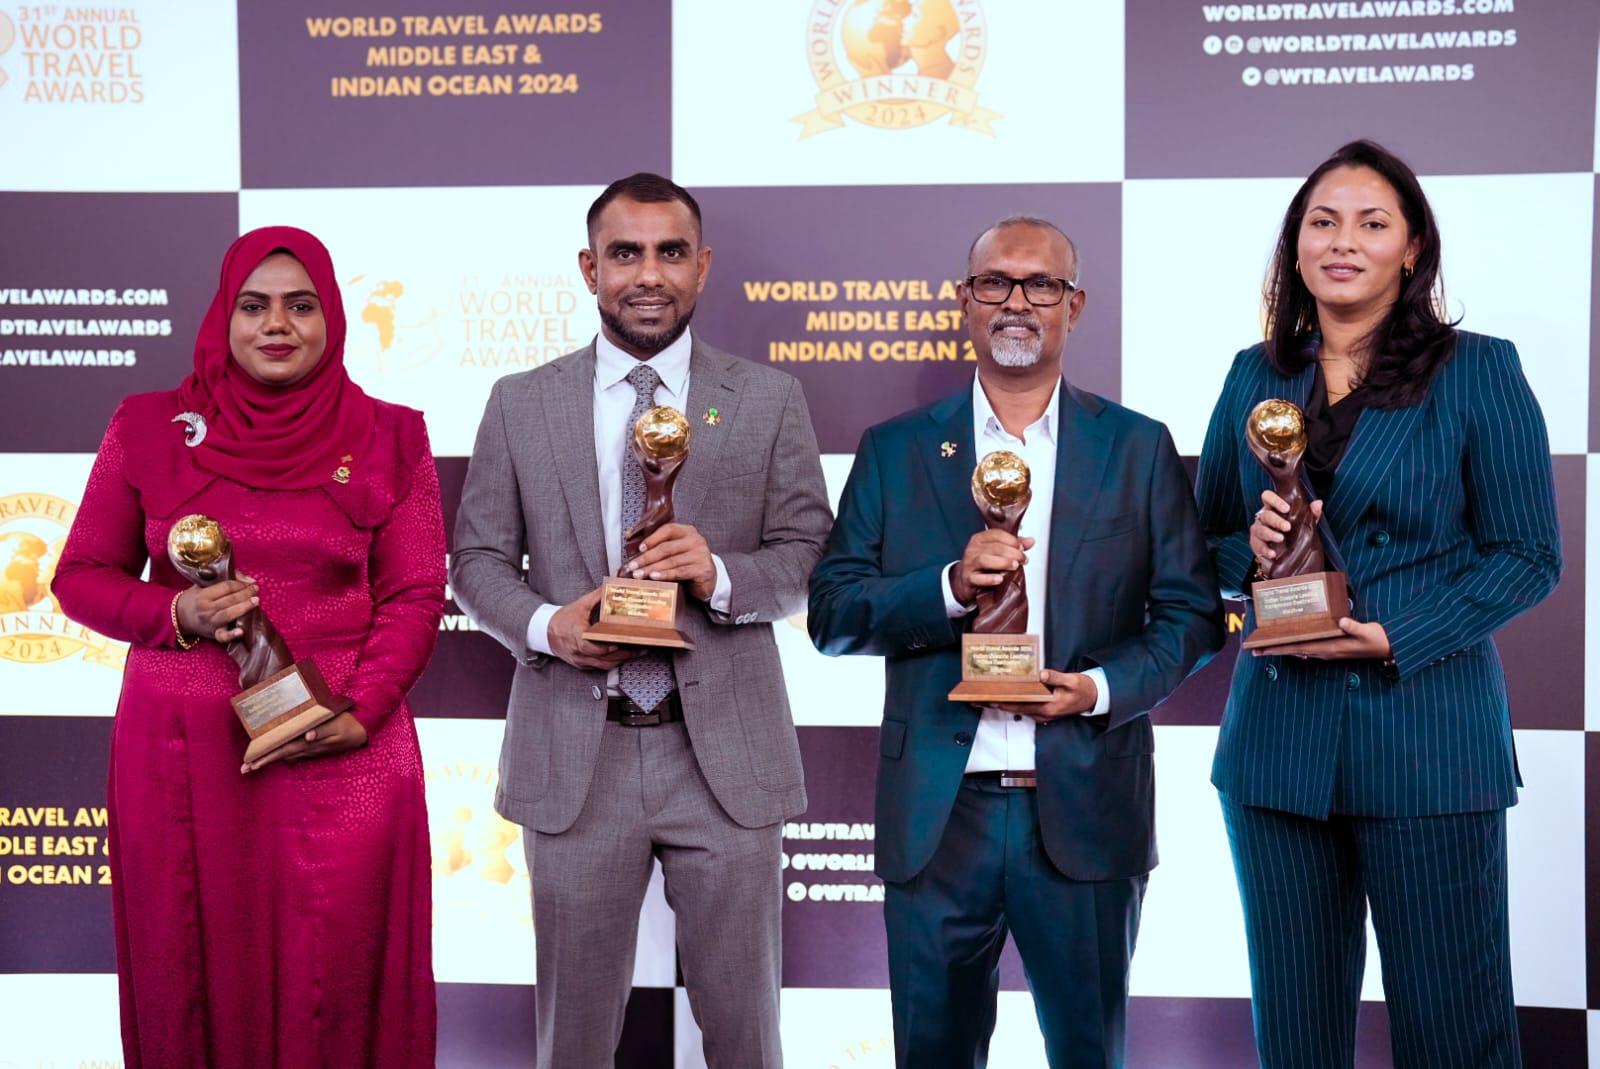 Maldives Wins prestigious 4 Categories at the World Travel Awards Indian Ocean Category held during ATM 2024